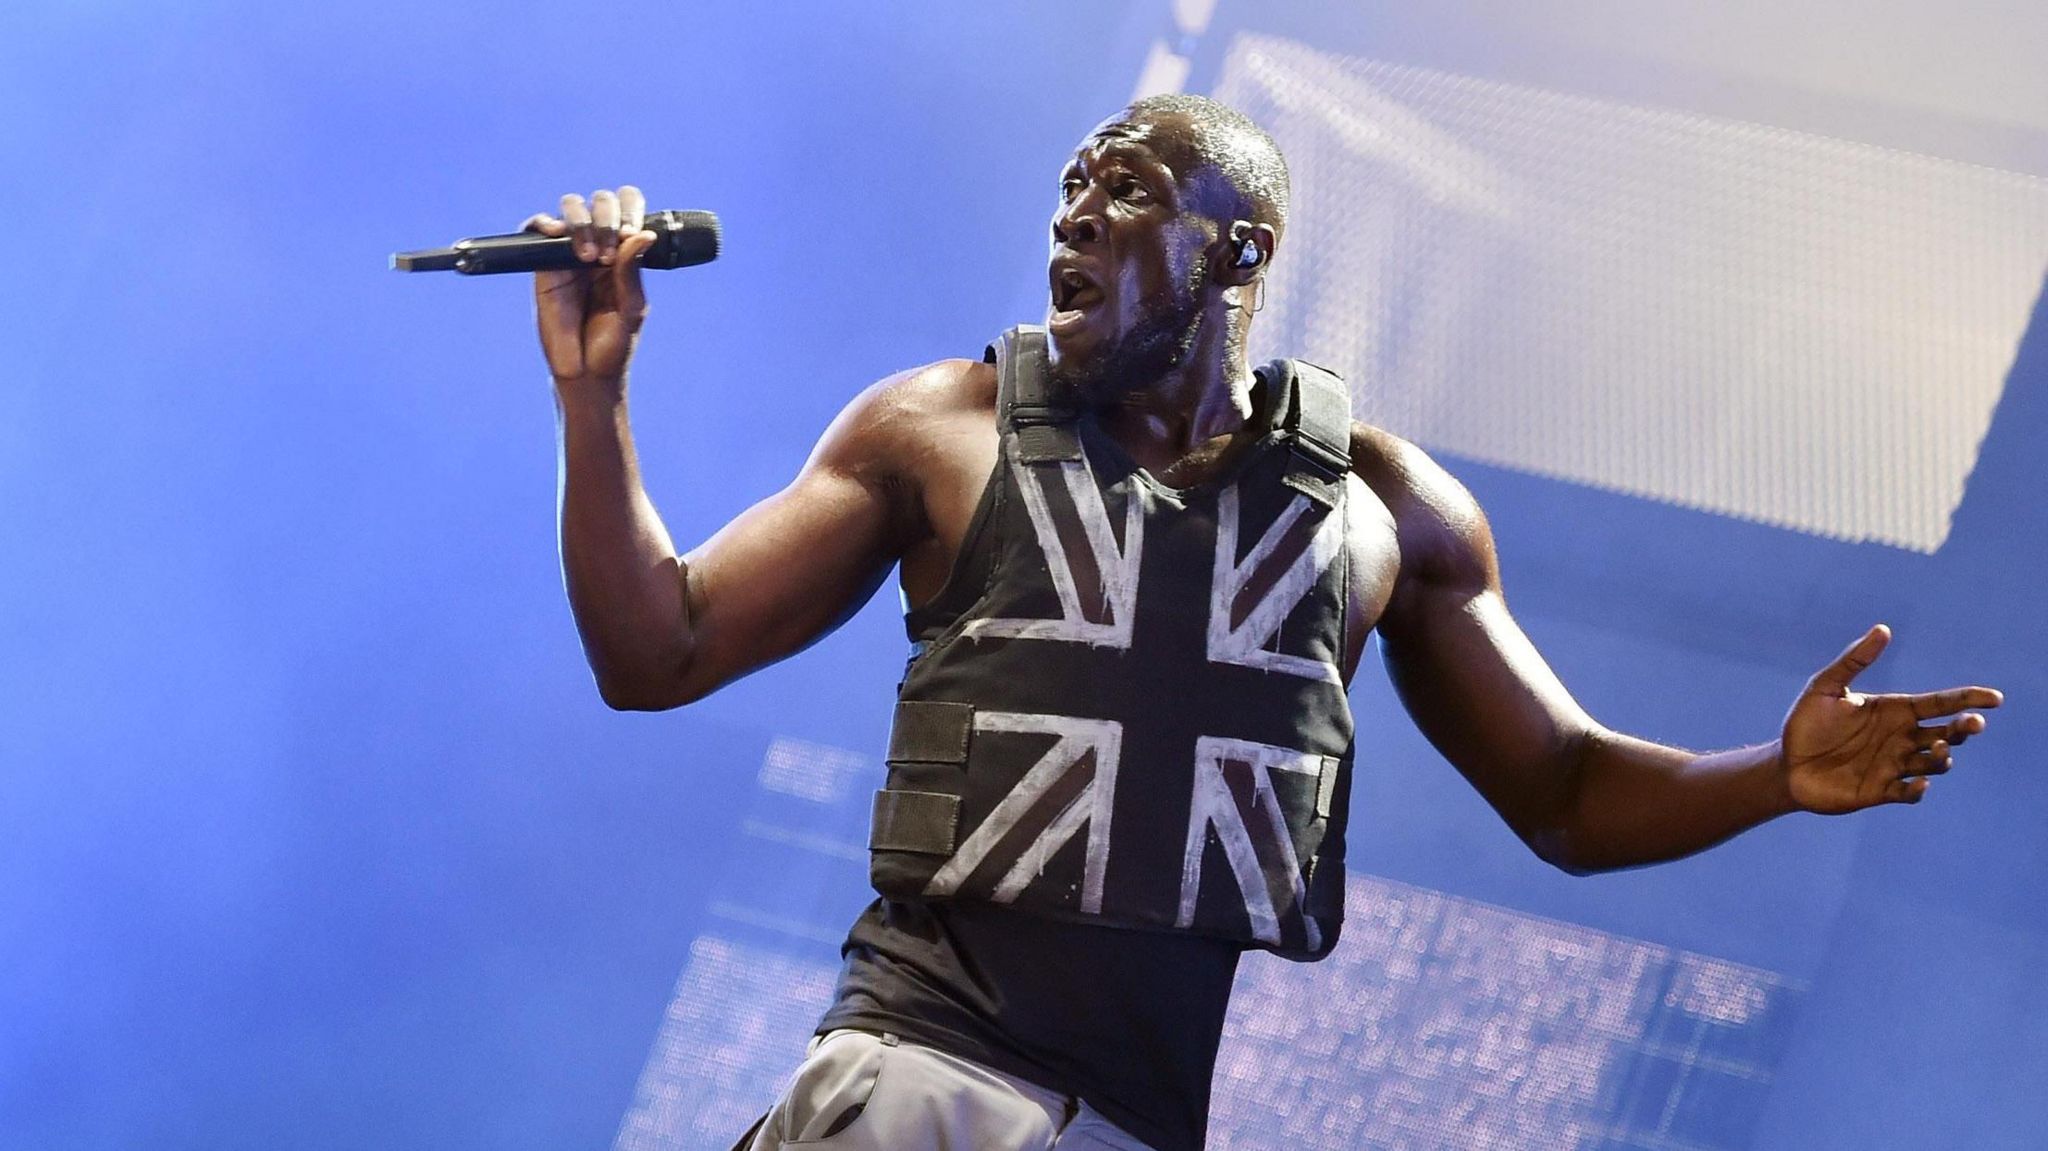 Stormzy performing during Glastonbury Festival in 2019.